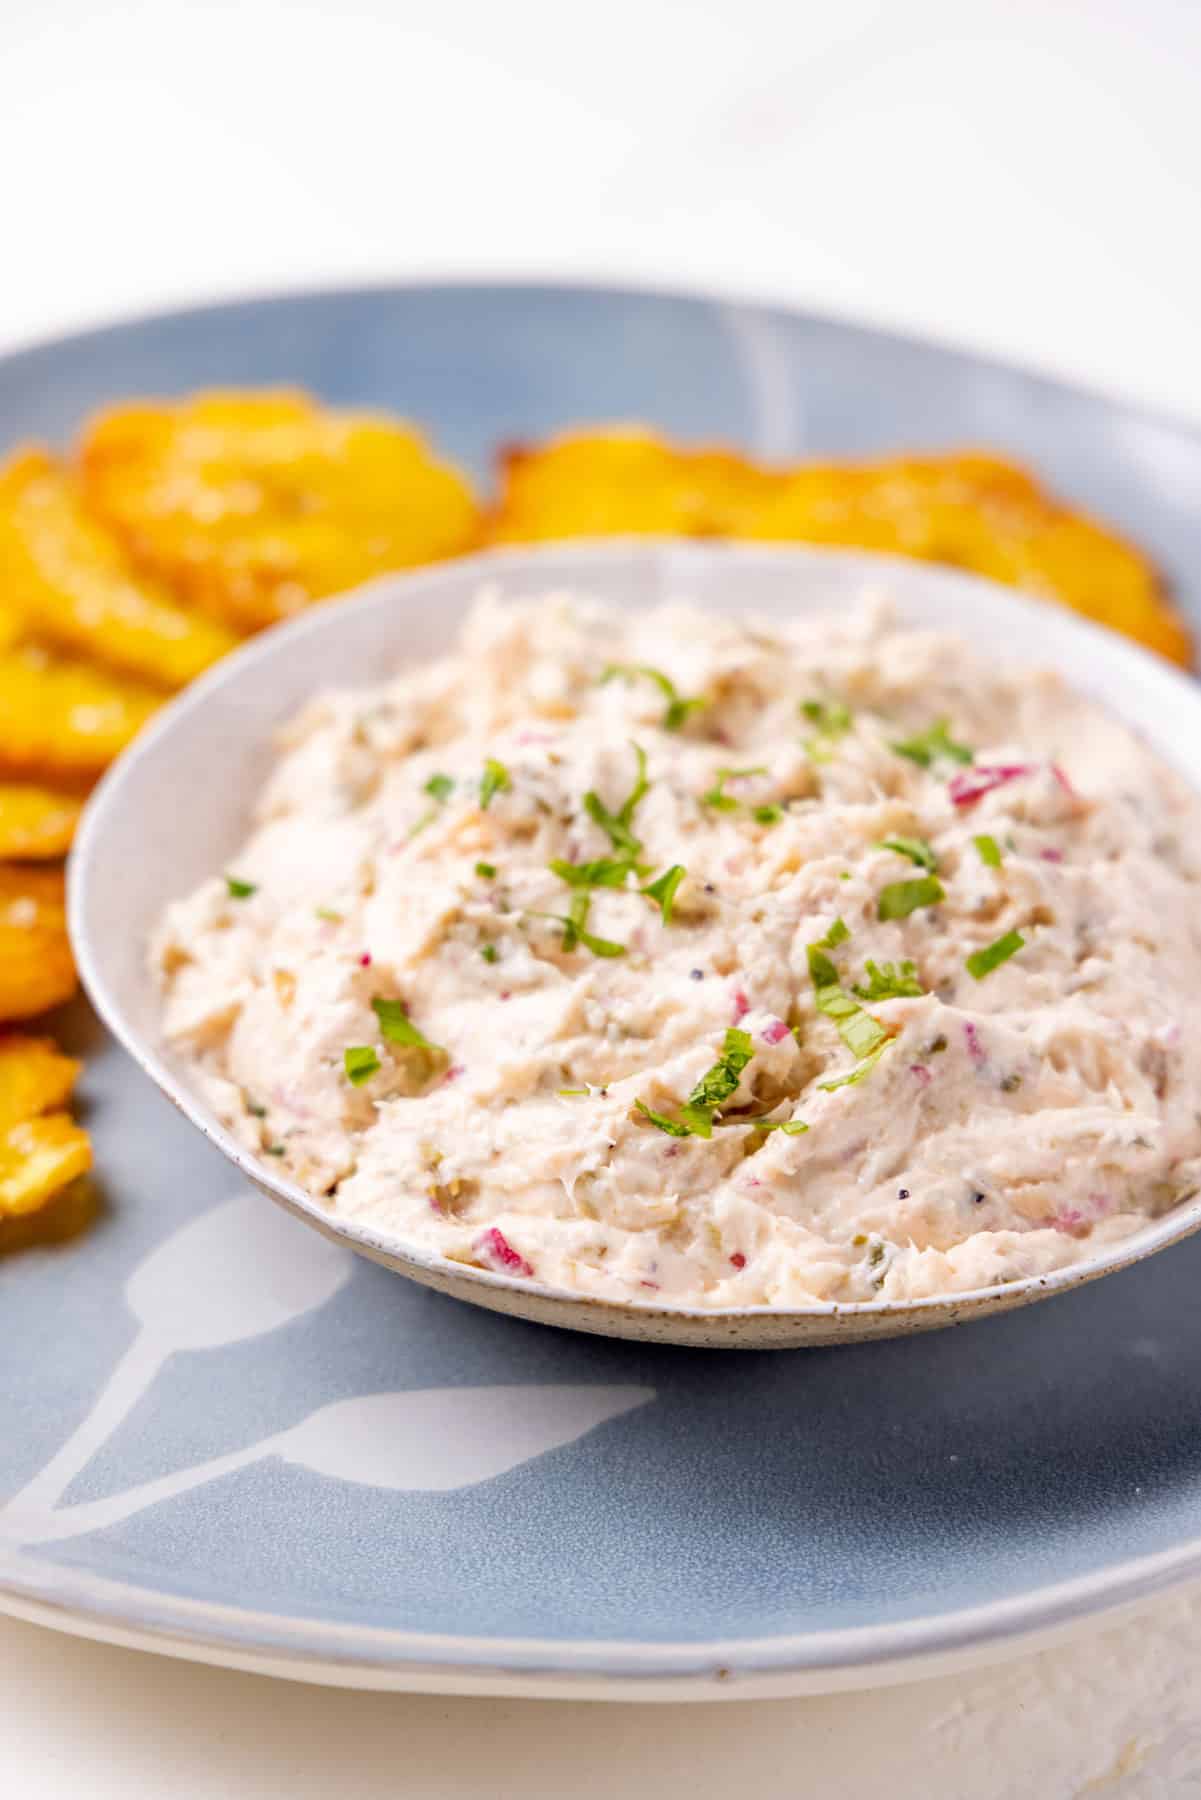 Tuna dip with cream cheese and capers.